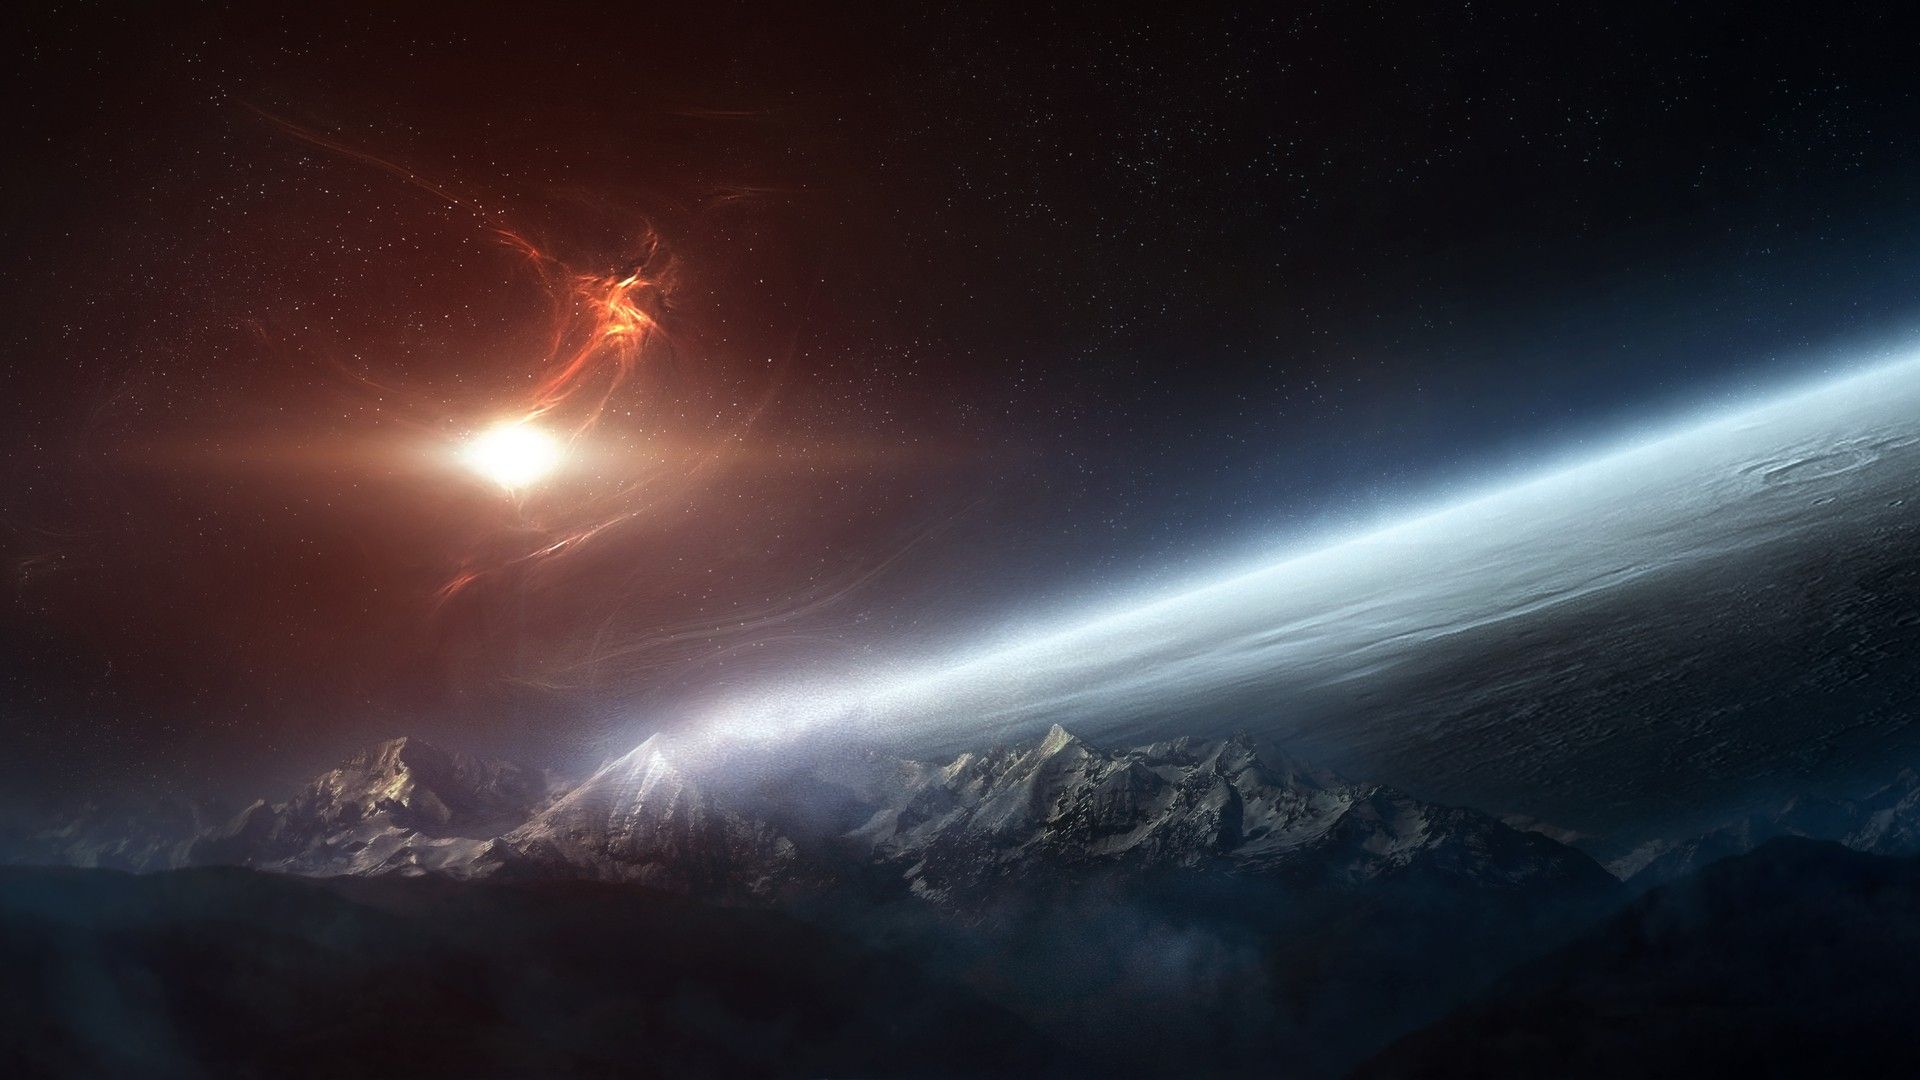 Hd 1080P Space Explosion Wallpapers